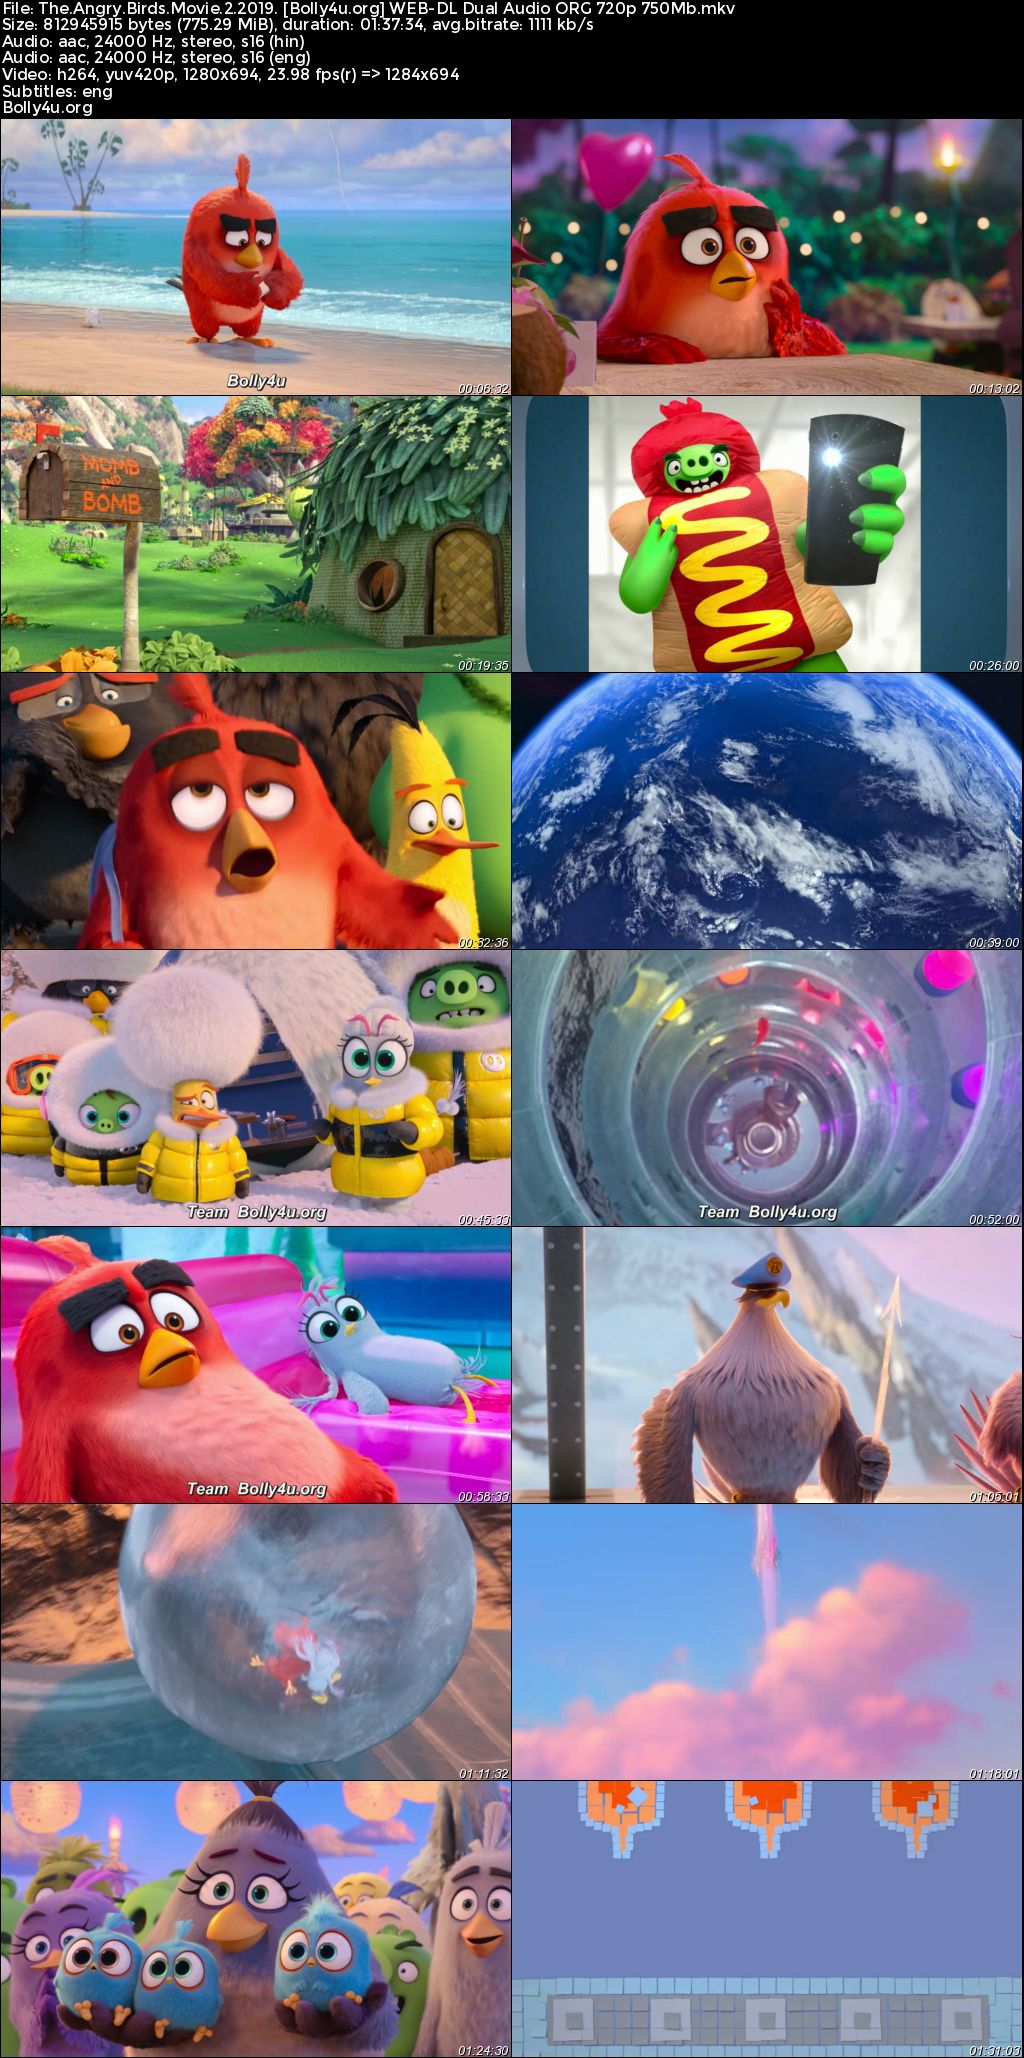 The Angry Birds Movie 2 2019 WEB-DL Hindi Dual Audio ORG Full Movie Download 1080p 720p 480p